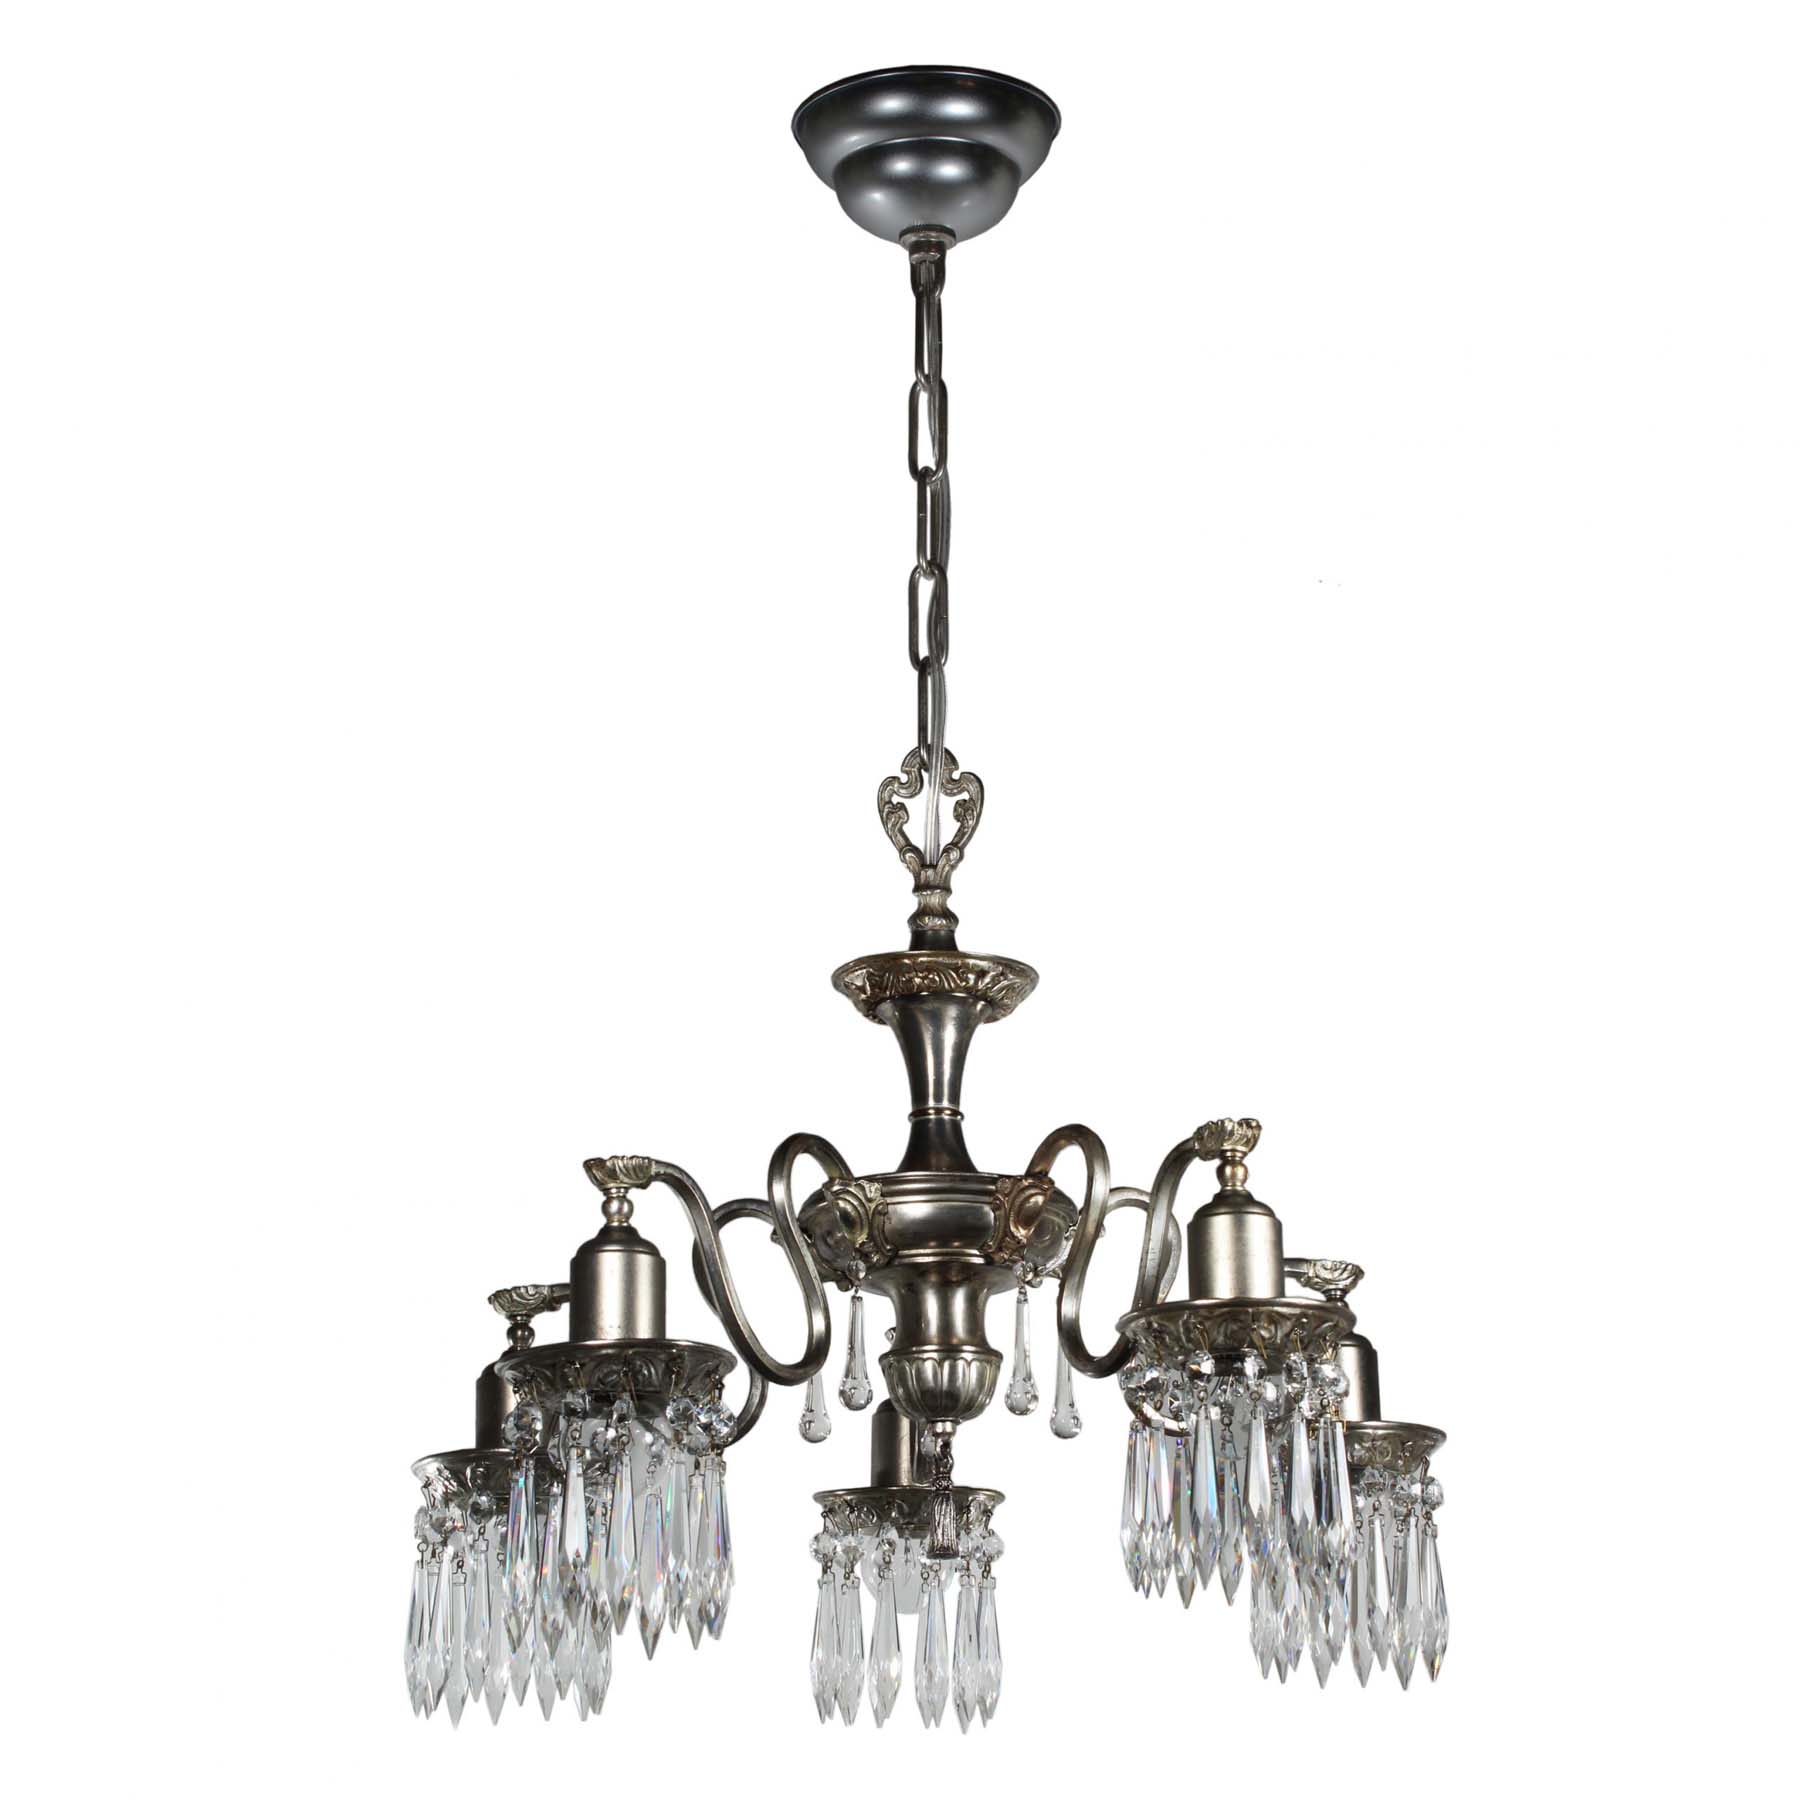 SOLD Antique Neoclassical Silver Plate Chandelier with Prisms-71090